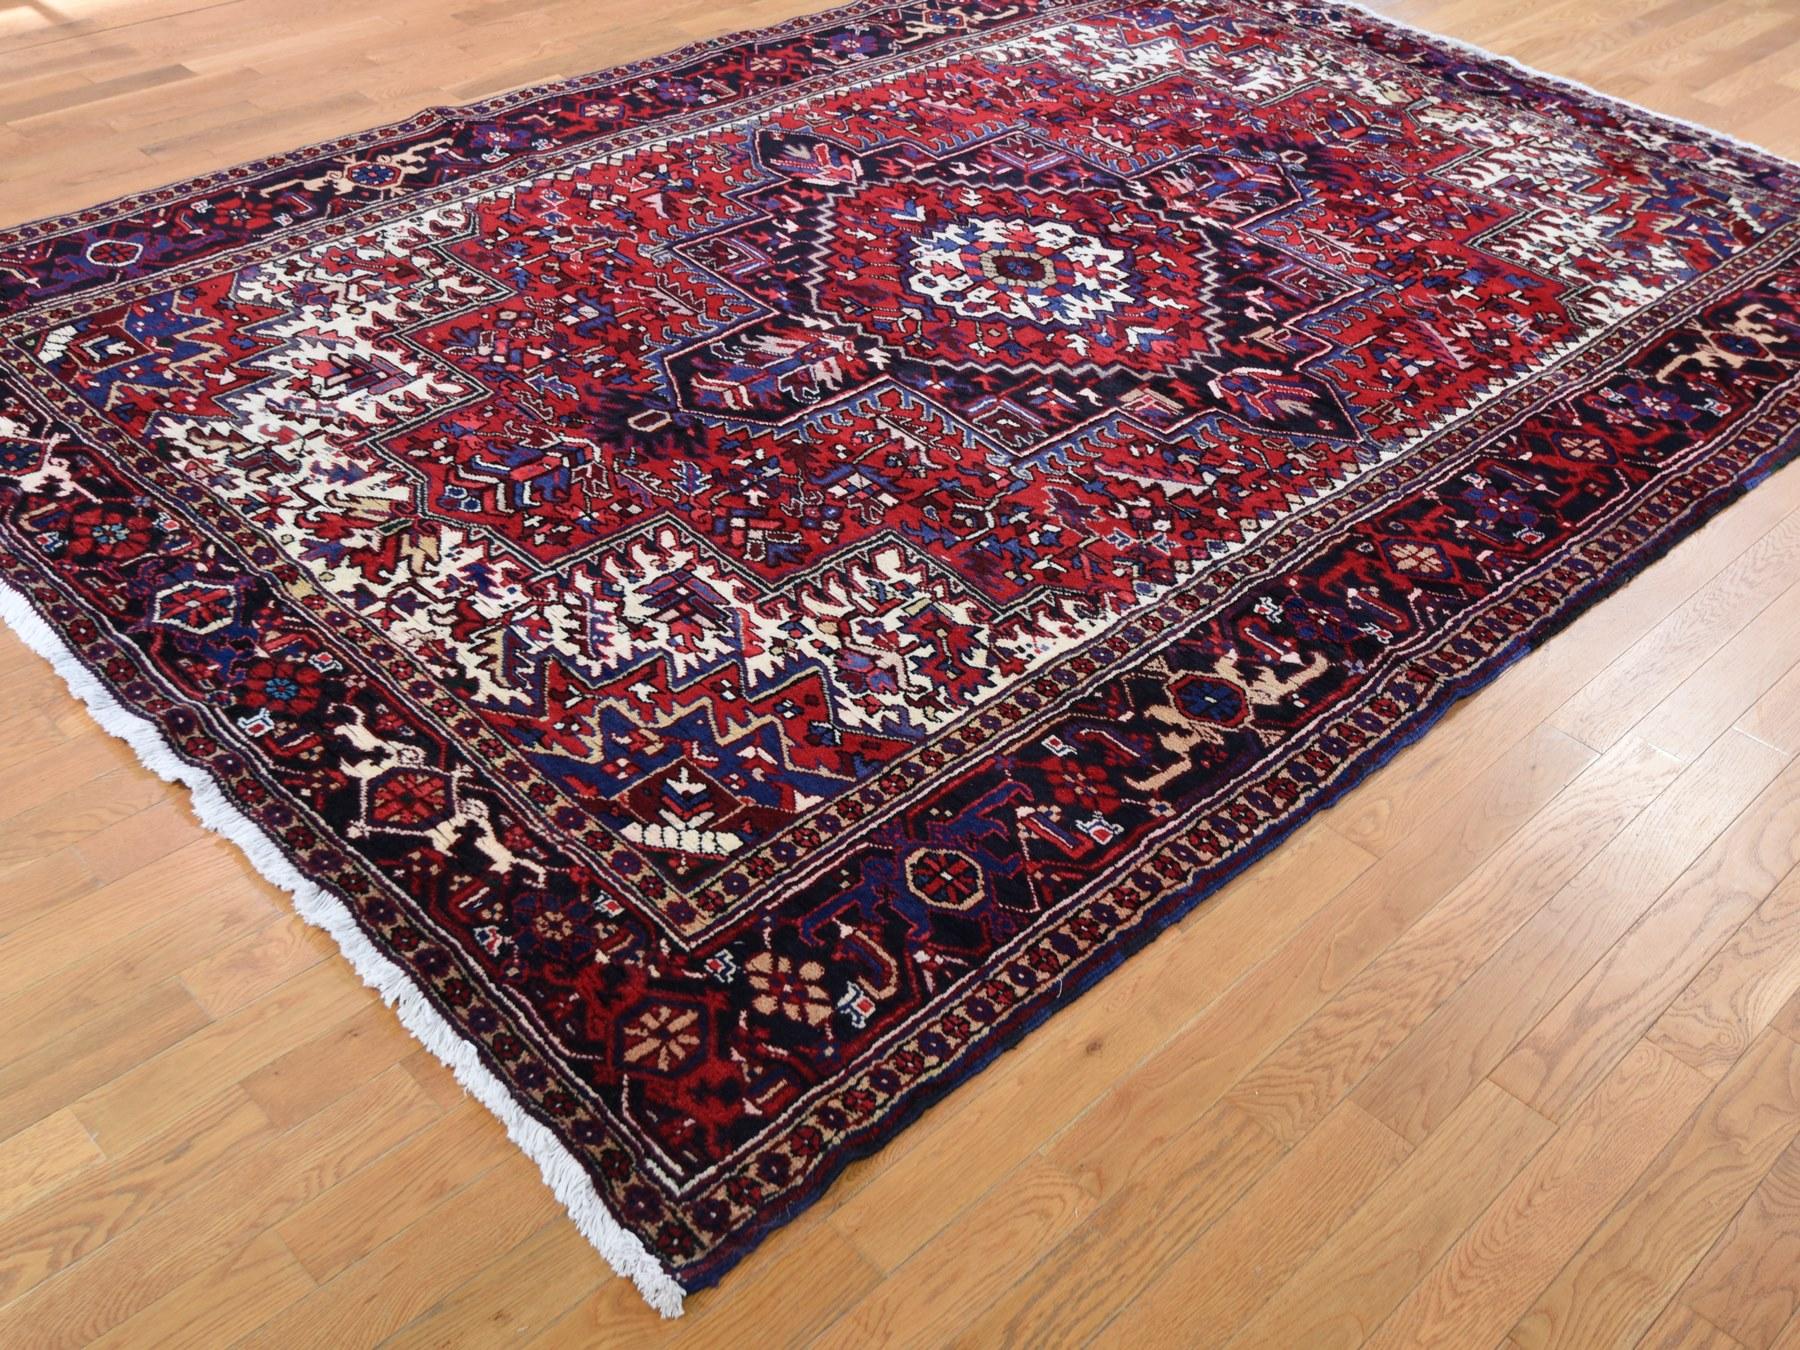 Hand-Knotted Red Semi Antique Persian Heriz Good Condition Hand Knotted Oriental Rug, 7'9